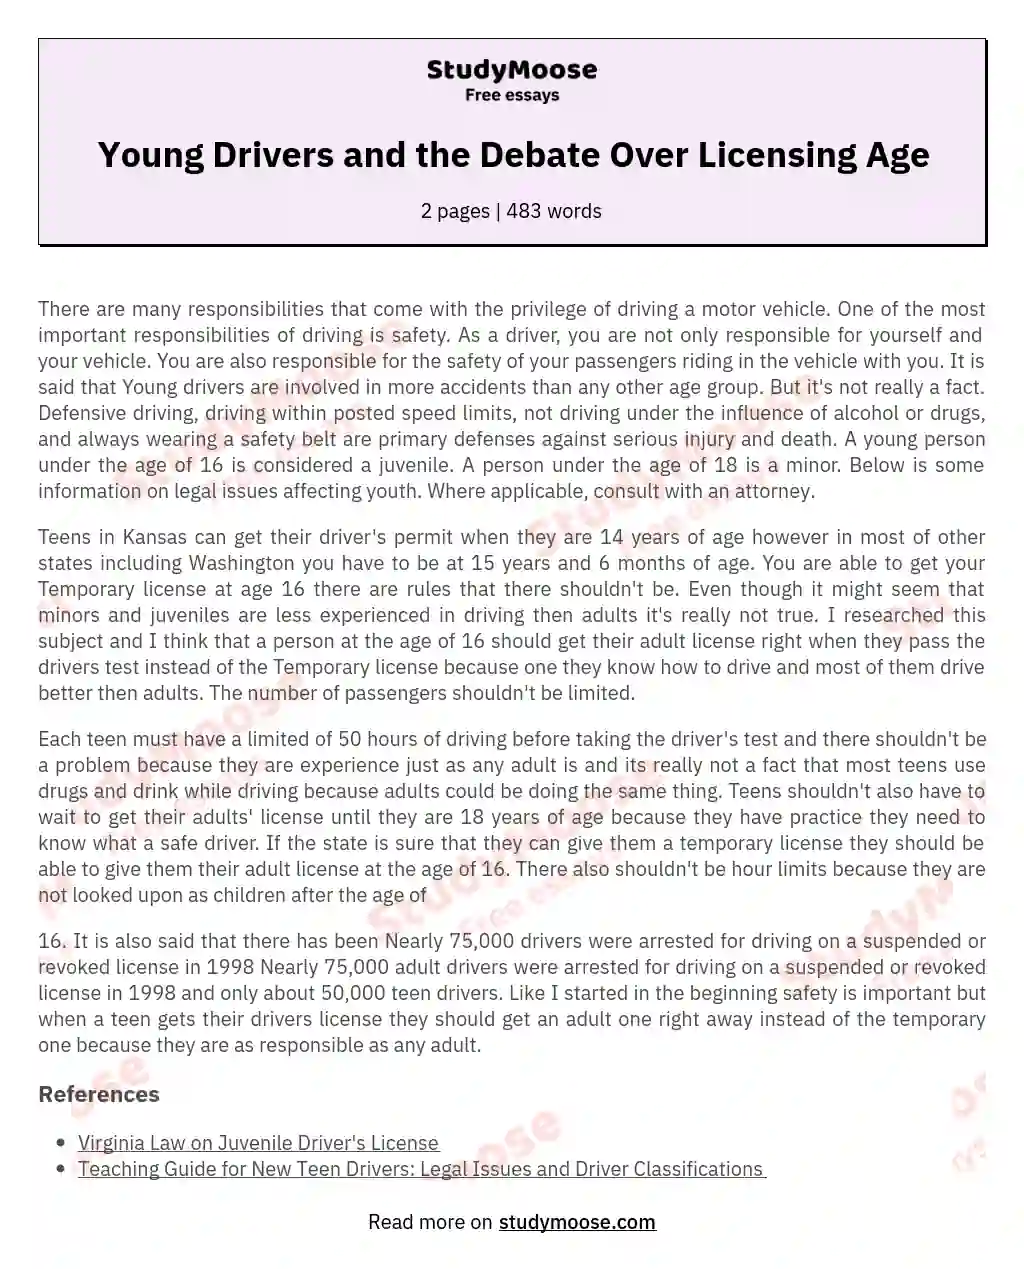 Young Drivers and the Debate Over Licensing Age essay